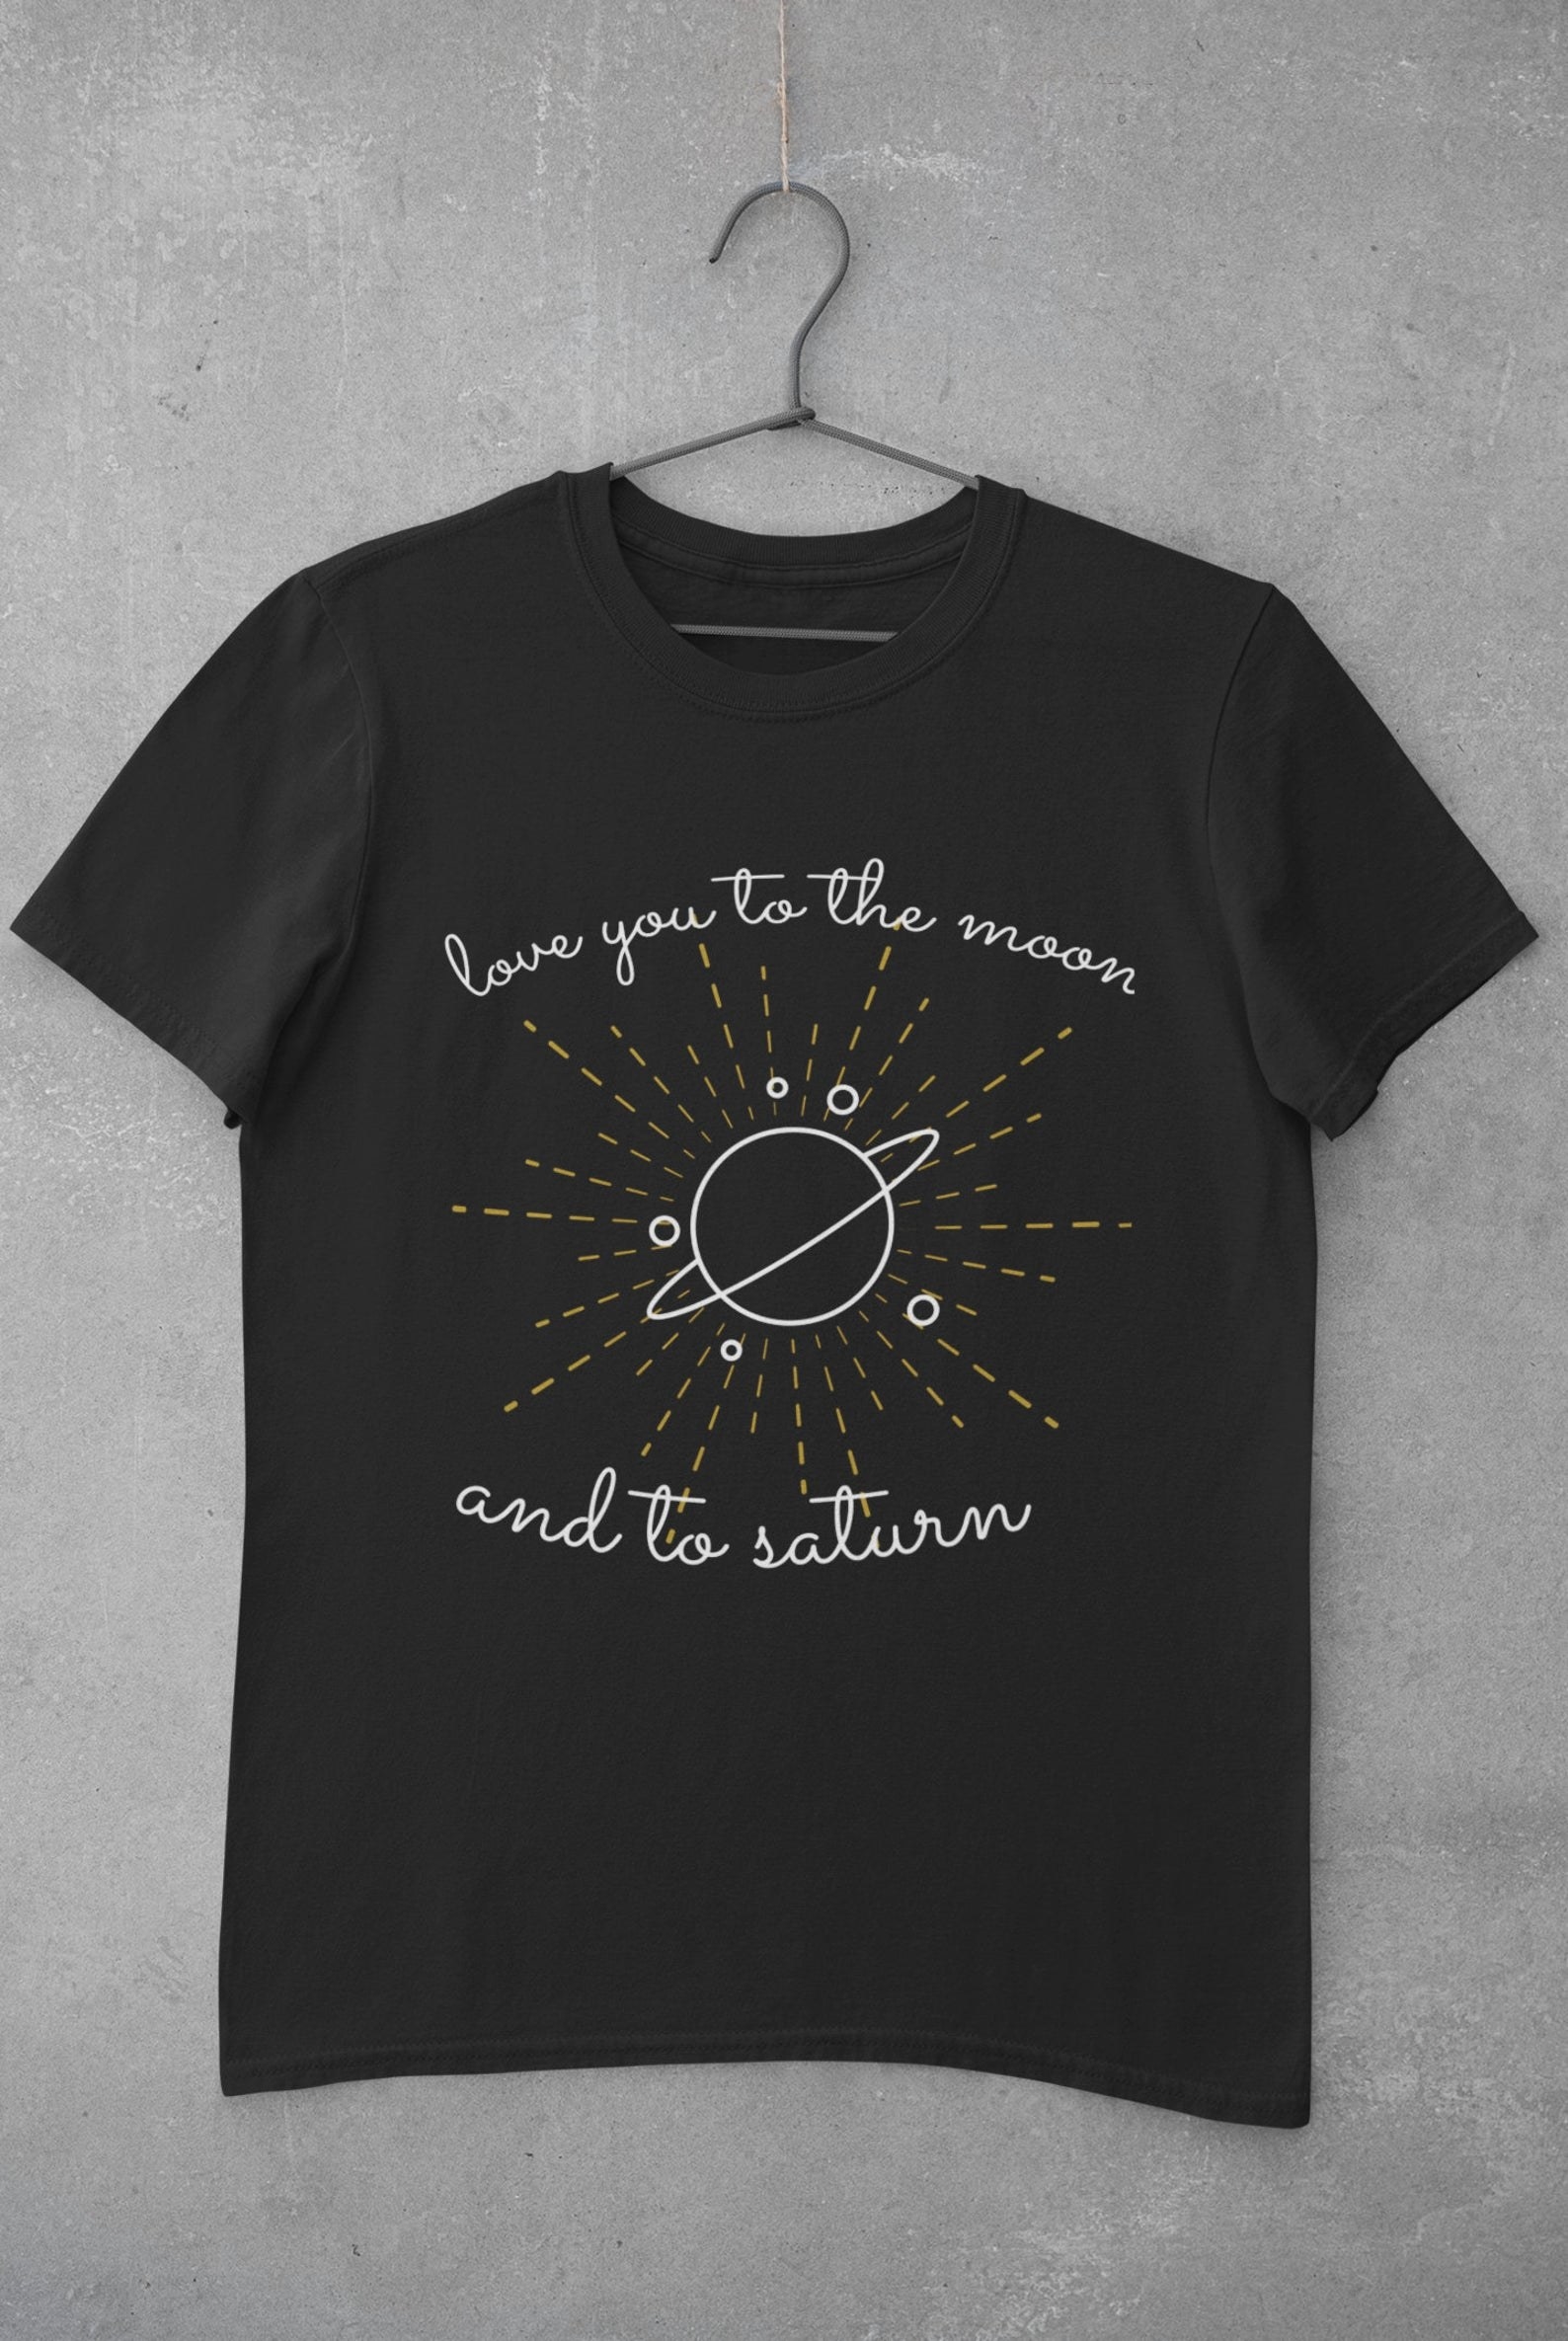 a black tee with an illustrations of saturn on it and the lyrics &quot;i love you to the moon and to saturn&quot;